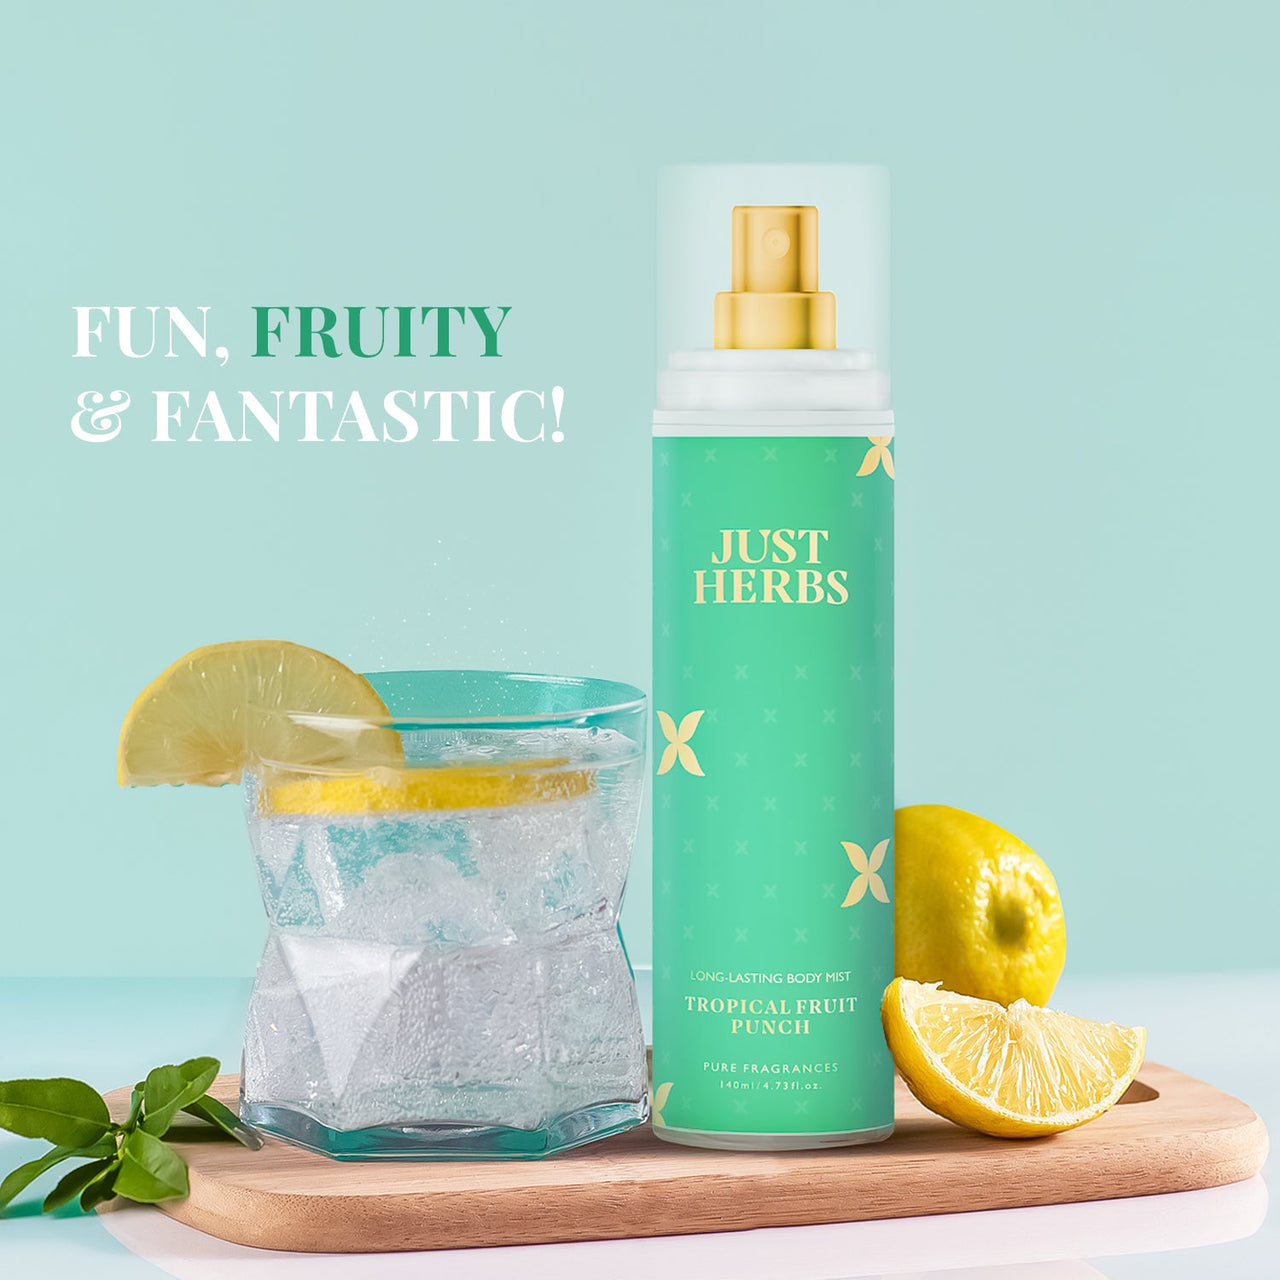 Long-Lasting Tropical Fruit Punch Body Mist - Just Herbs